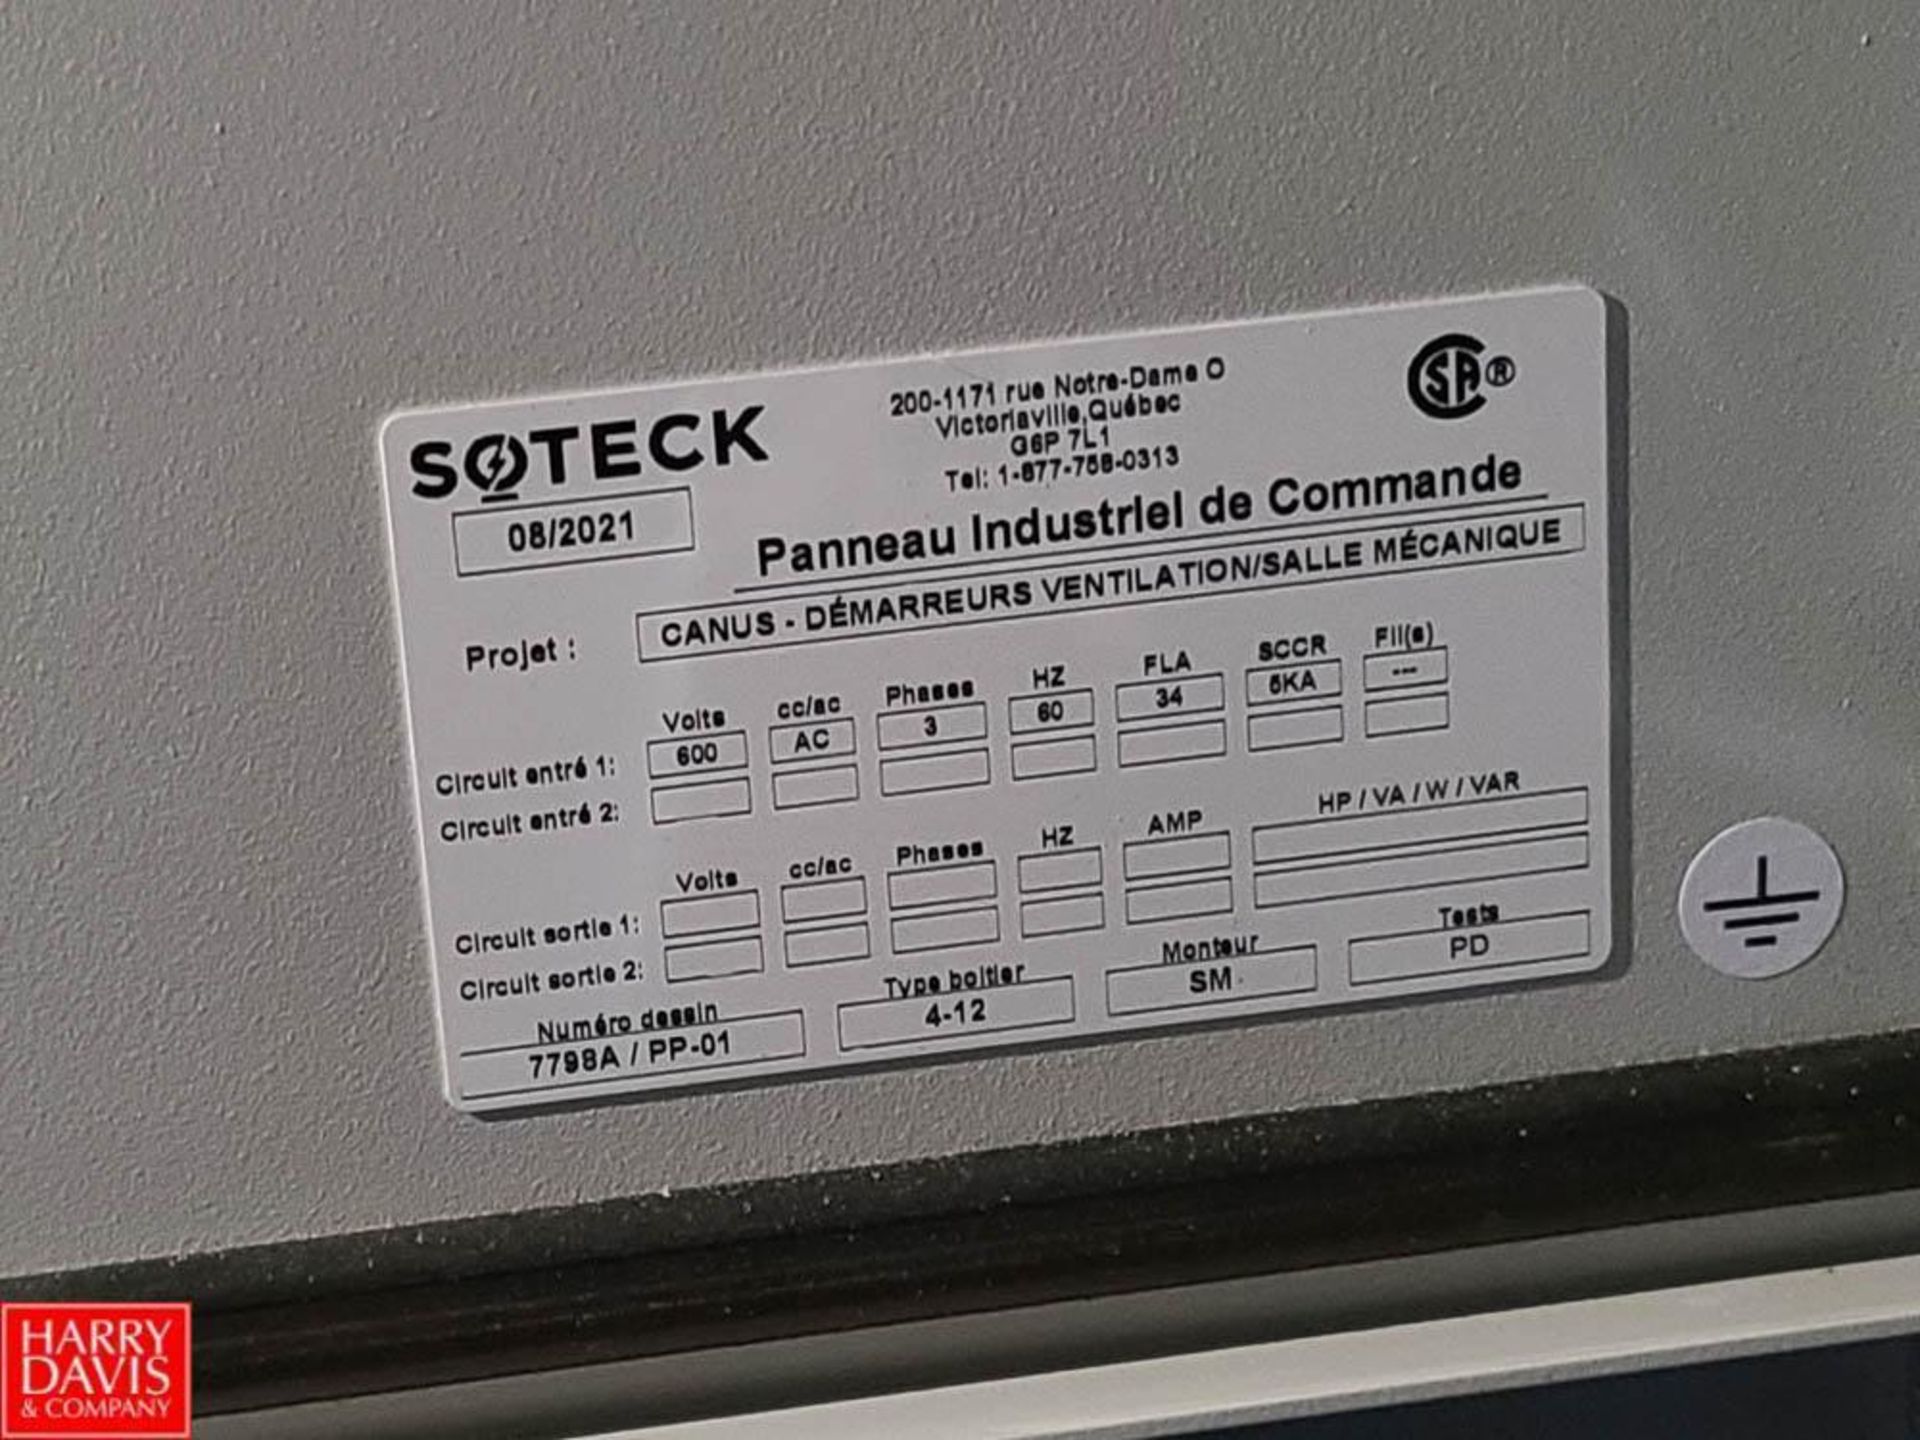 2021 Soteck Control Panel with Relays and Fuses - Rigging Fee: $125 - Image 3 of 3